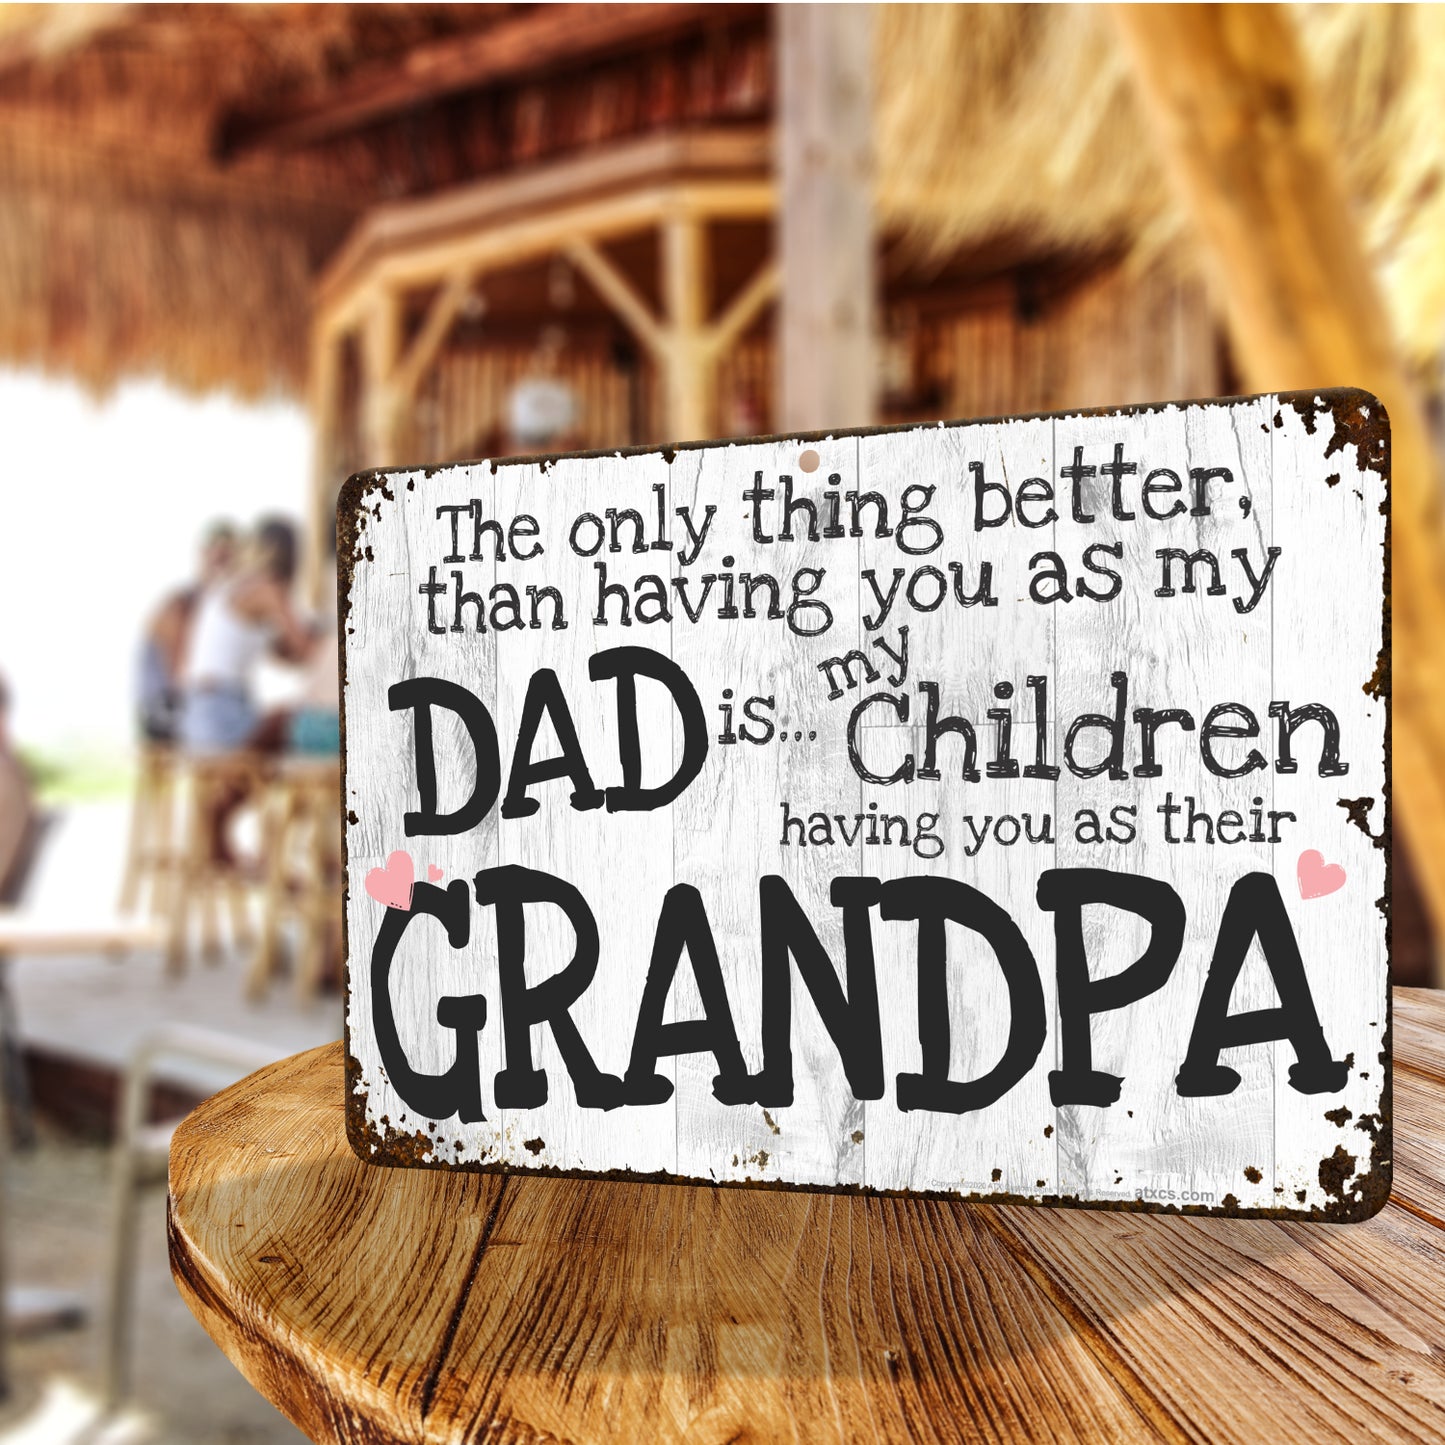 We Love you Grandpa and Dad Sign The Only Thing Better Than Having You As My Dad Is My Children Having You As Their Grandpa - Size 8 x 12